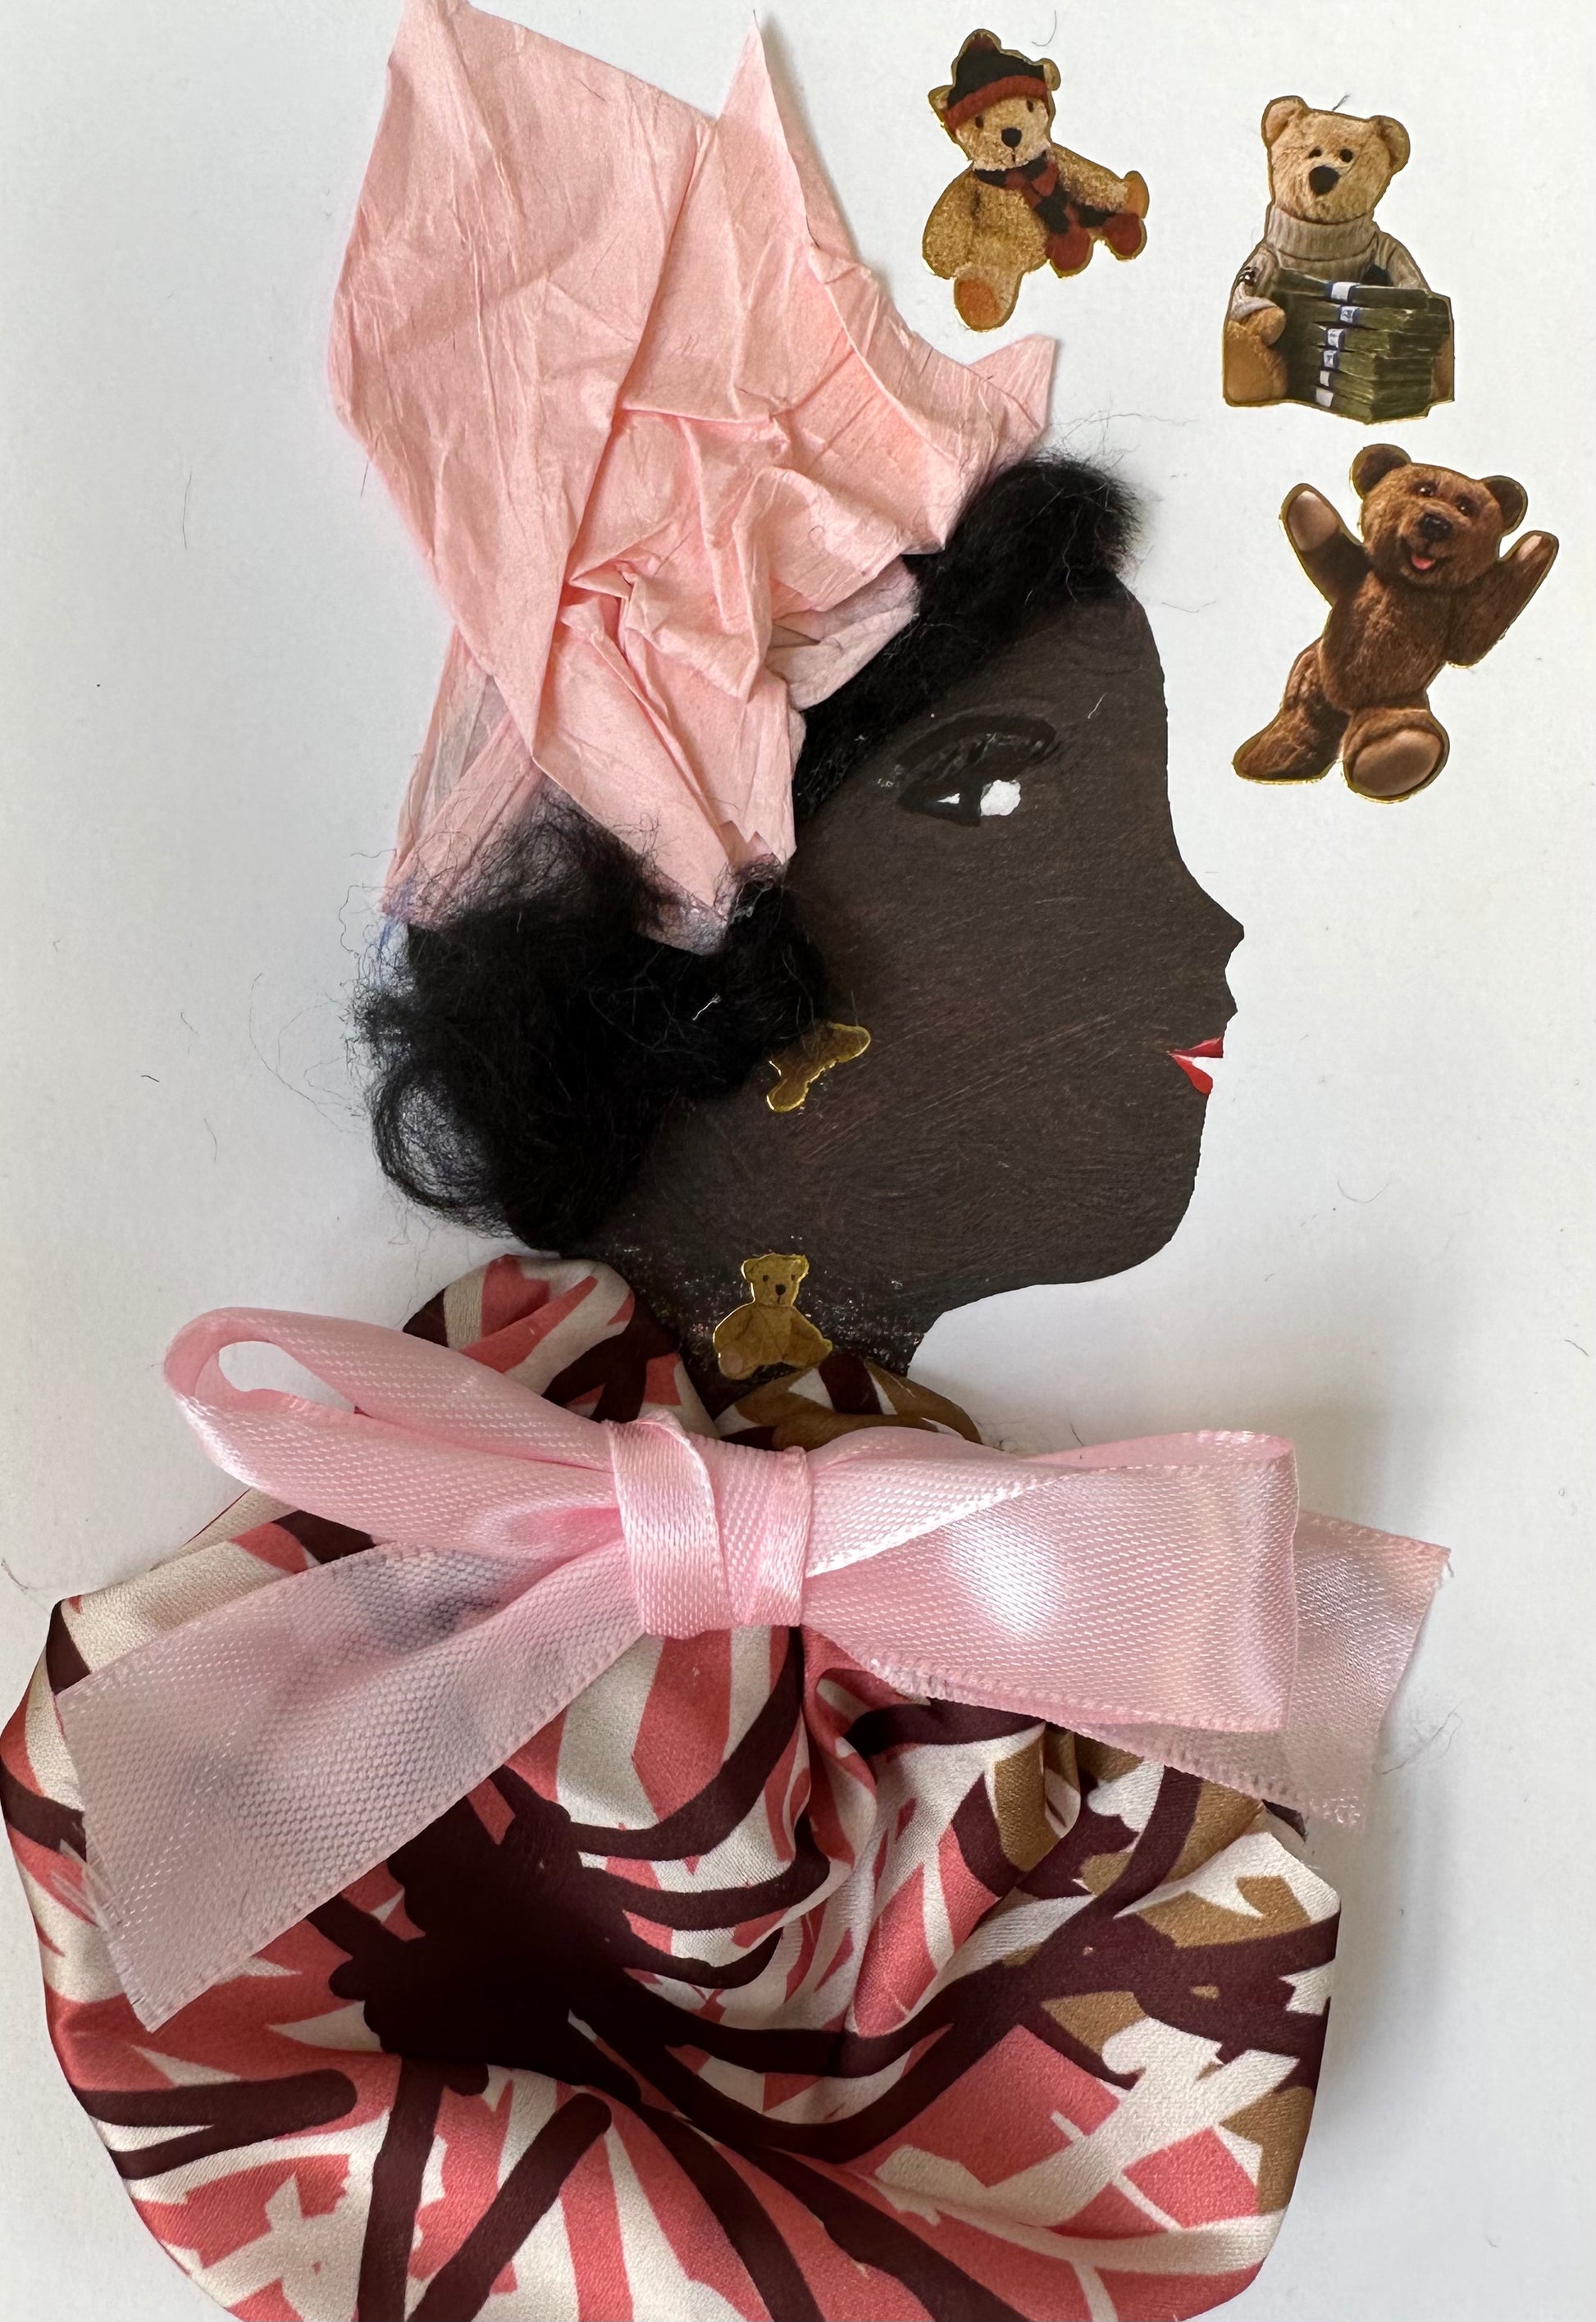 I designed this handmade card of a black woman dressed in a pink and brown blouse with a light pink bow as her collar. She has a light pink hatinator as well as Teddy Bears surrounding her. 